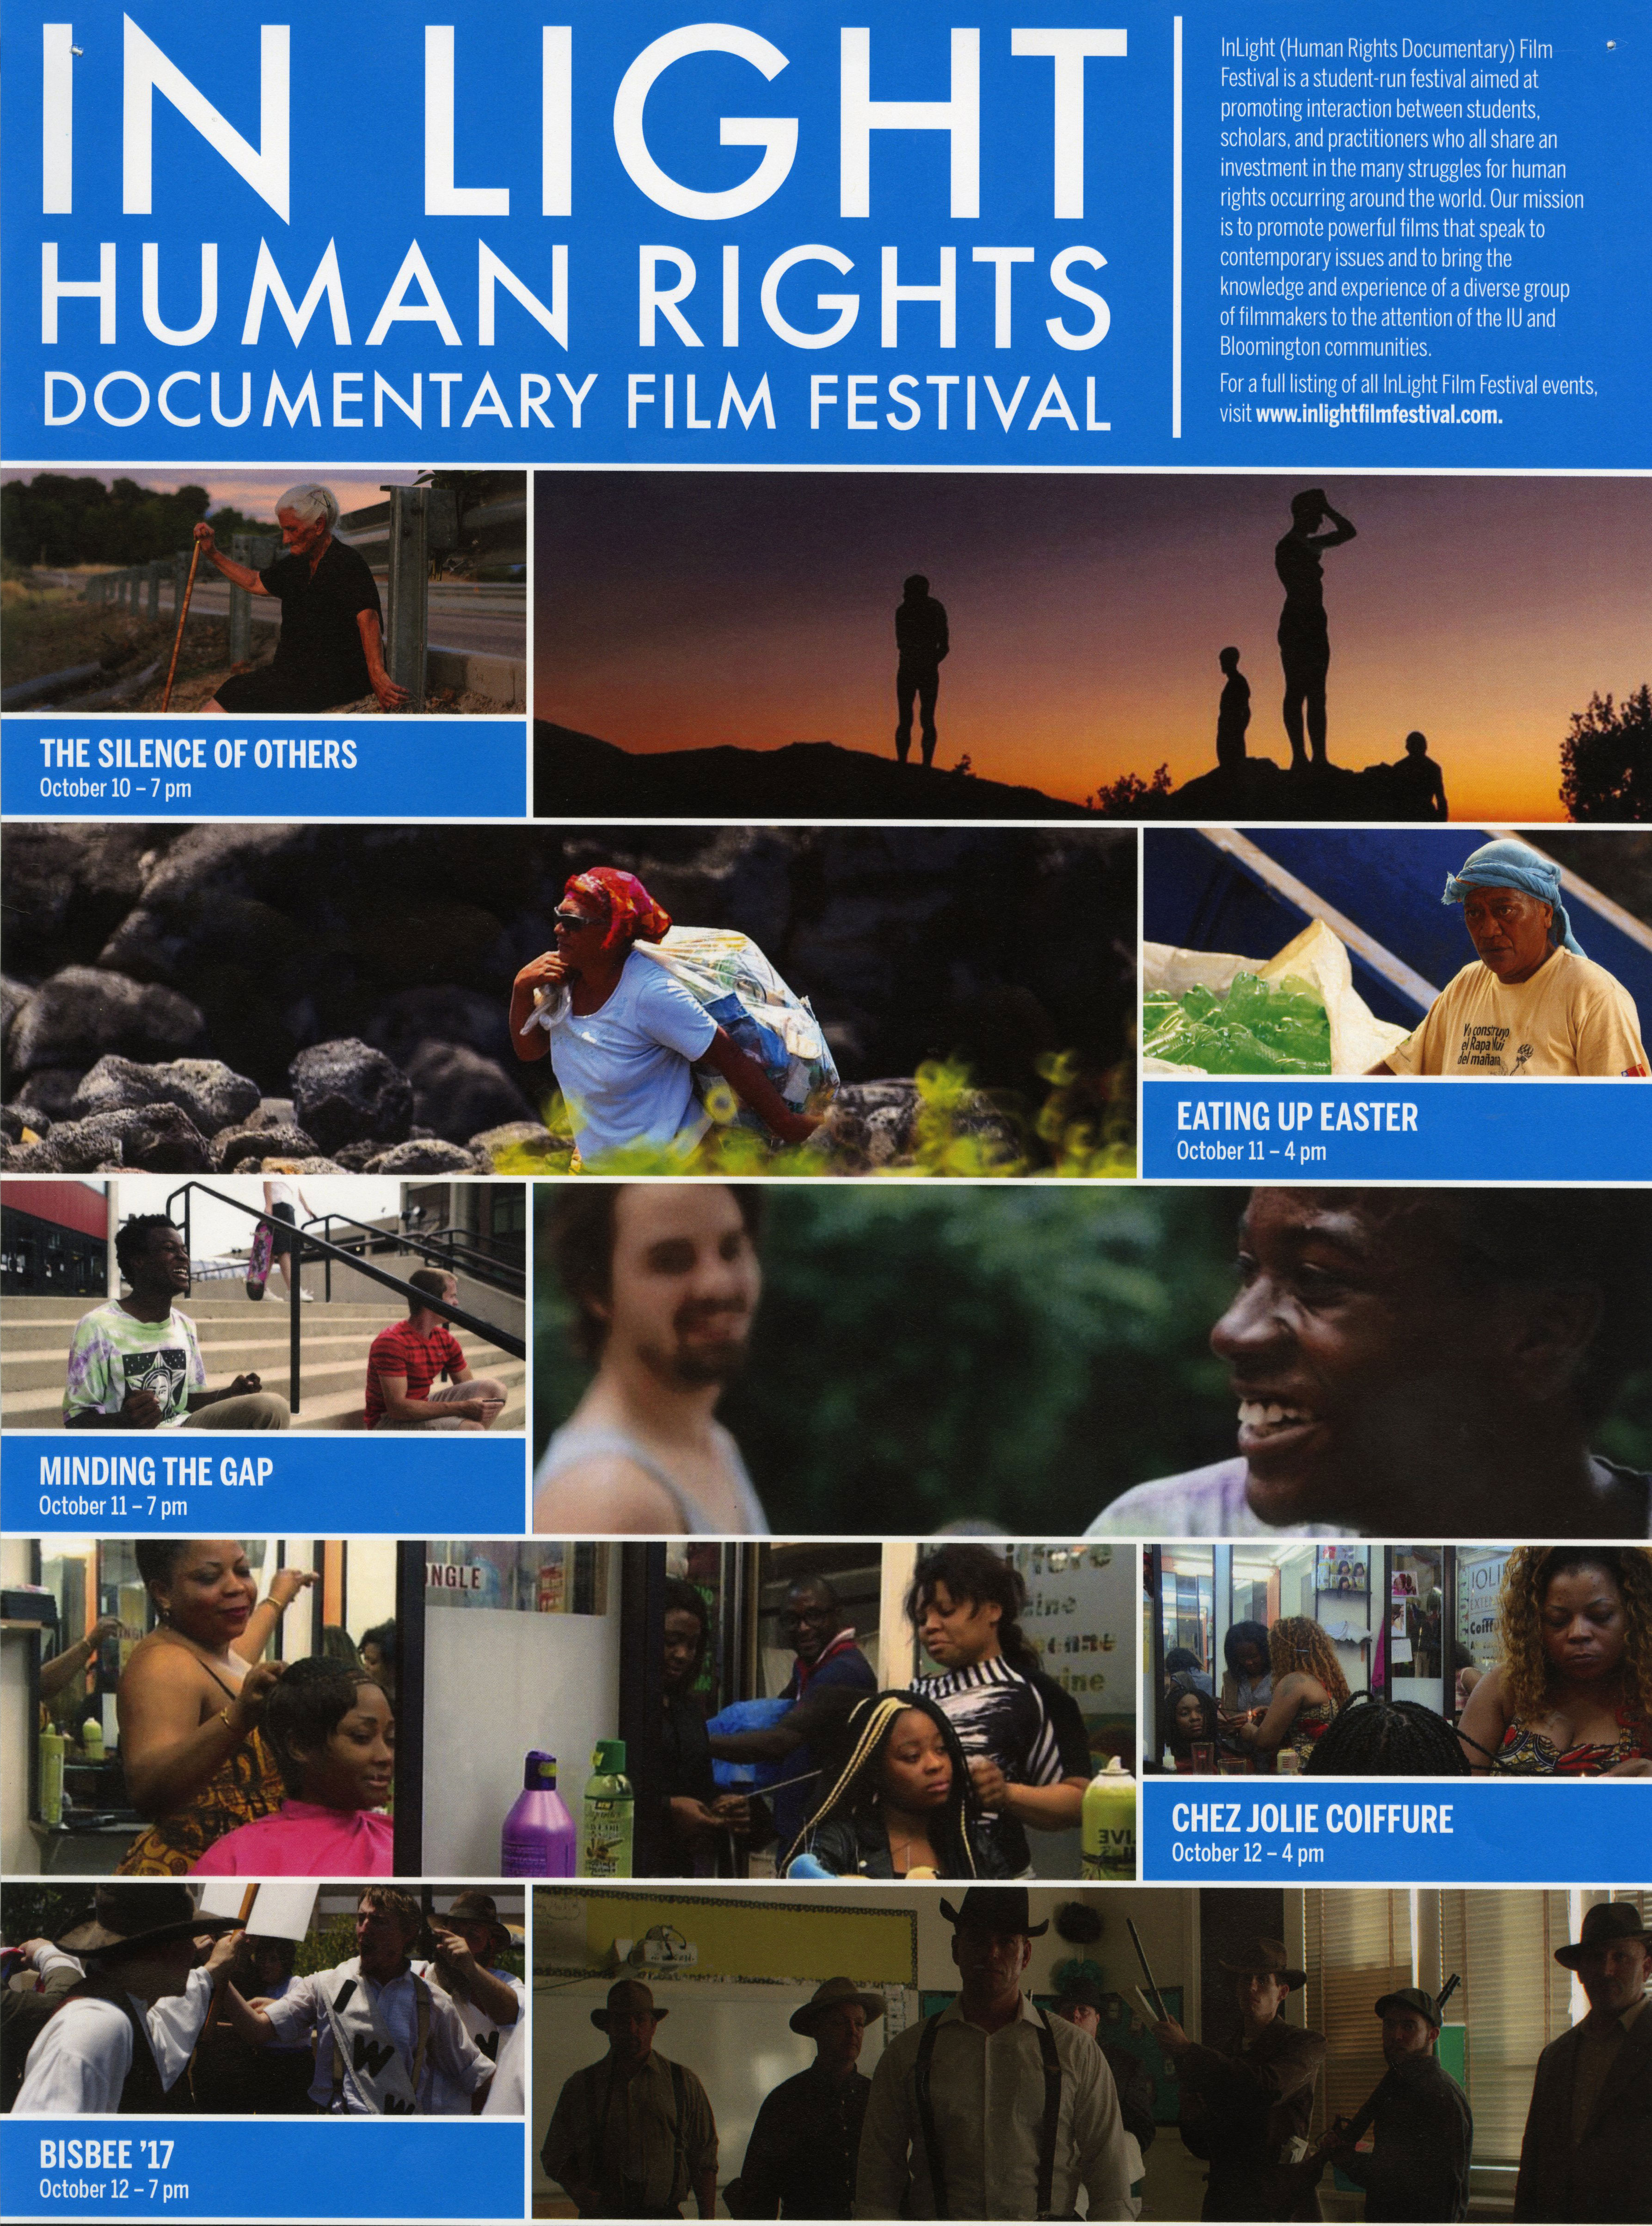 Poster for the 2017 In Light Human Rights Documentary Film Festival. The top says:  InLight Human Rights Documentary Film Festival. In Light (Human Rights Documentary) Film Festival is a student-run festival aimed at promoting interaction between students, scholars, and practitioners who all share an investment in the many struggles for human rights occurring around the world. Our mission is to promote powerful films that speak to contemporary issues and to bring the knowledge and experience of a diverse group of filmmakers to the attention of the IU and Bloomington communities. For a full listing of all InLight Film Festival events, visit www.inlightfilmfestival.com.  Below the copy is a collage of film stills: A woman sitting along the highway holding a cane. Text says: The Silence of Others. October 10 - 7 p.m. Four figures standing on a mountain during sunset. A woman carrying a large bag over her back, walking in front of boulders. A person sitting next to a bag full of empty two-liter bottles. Text says: Eating Up Easter. October 11 - 4 pm Two people sitting on a staircase. A person behind them holds a skateboard. Text says: Minding the Gap. October 11 - 7 pm Closeup of a man smiling, with another man behind him. Two women getting their hair done in a beauty shop. A mirror reflection of a woman getting her hair done in a beauty shop. Text says: Chez Jolie Coiffure. October 12 - 4 pm A man confronting a protestor holding a picket sign and wearing a shirt that says IWW. Another man behind him yells. Text says: Bisbee '17. October 12 - 7 pm Seven men wearing cowboy hats, some holding shotguns, stand in a classroom.